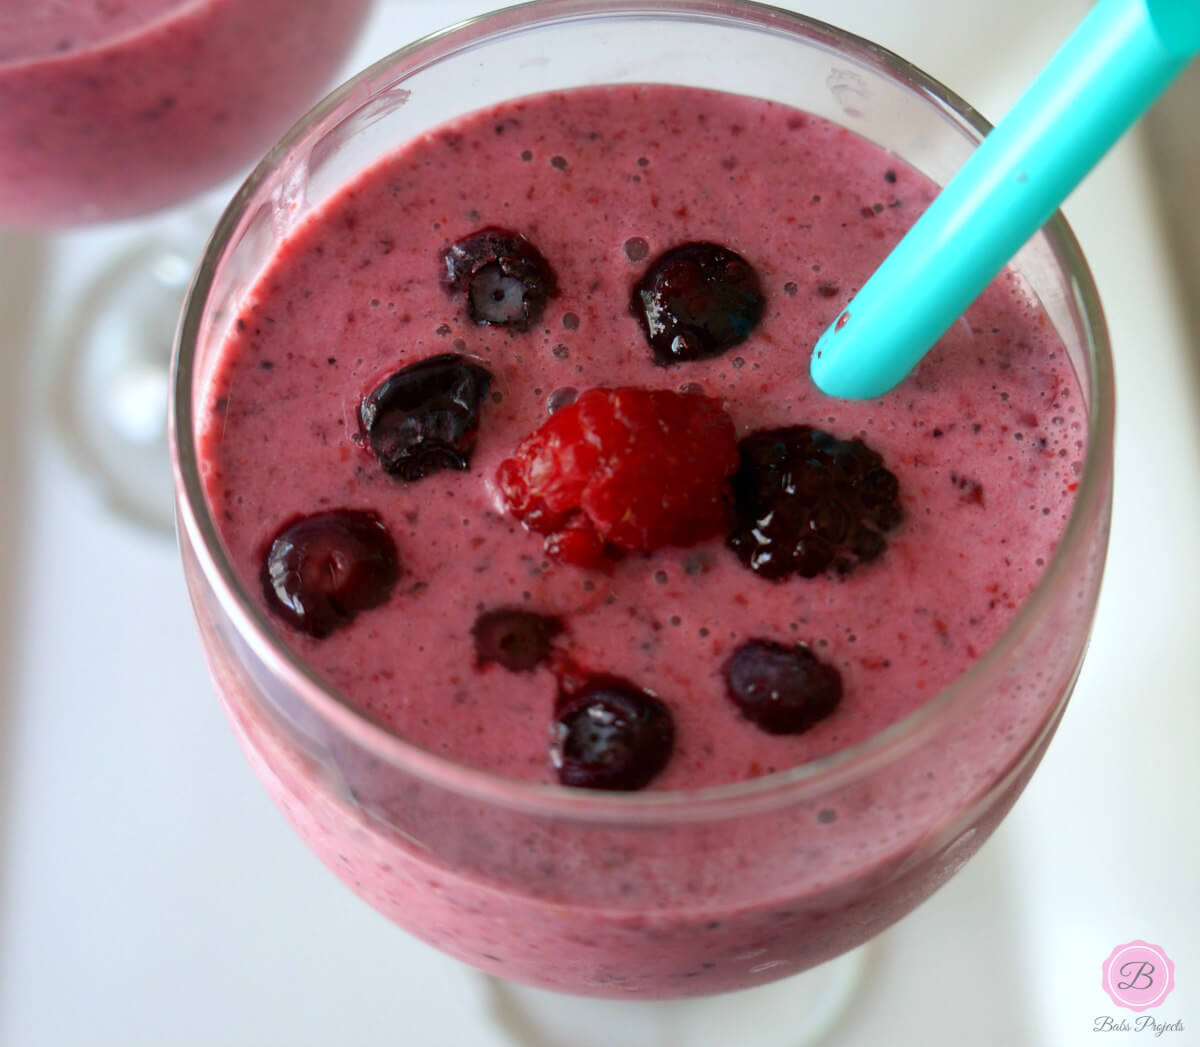 https://www.babsprojects.com/wp-content/uploads/2022/03/closeup-smoothie-pic.jpg